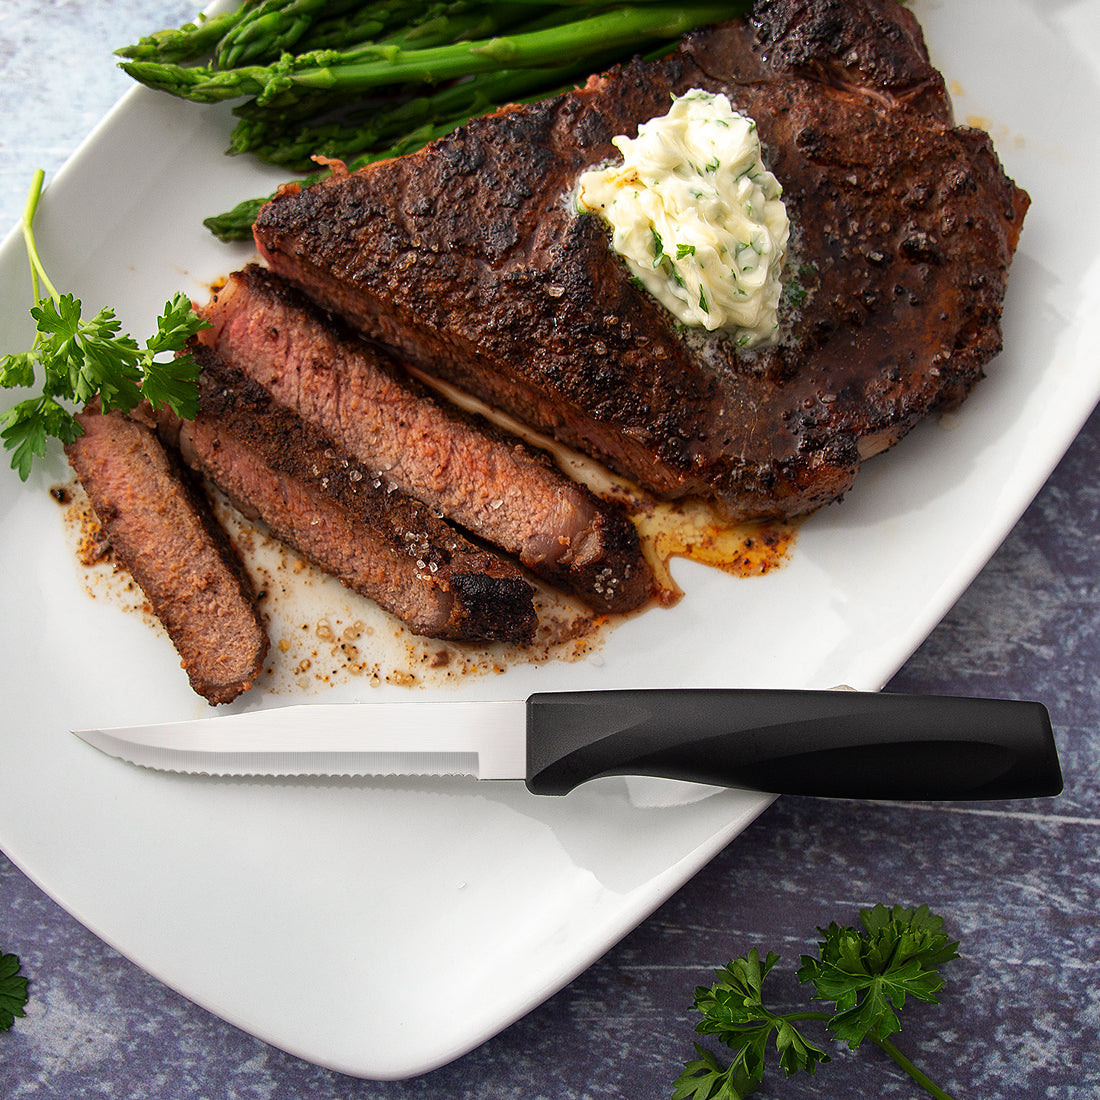 An Anthem Wave Serrated Steak Knife on a white plate with sliced meat